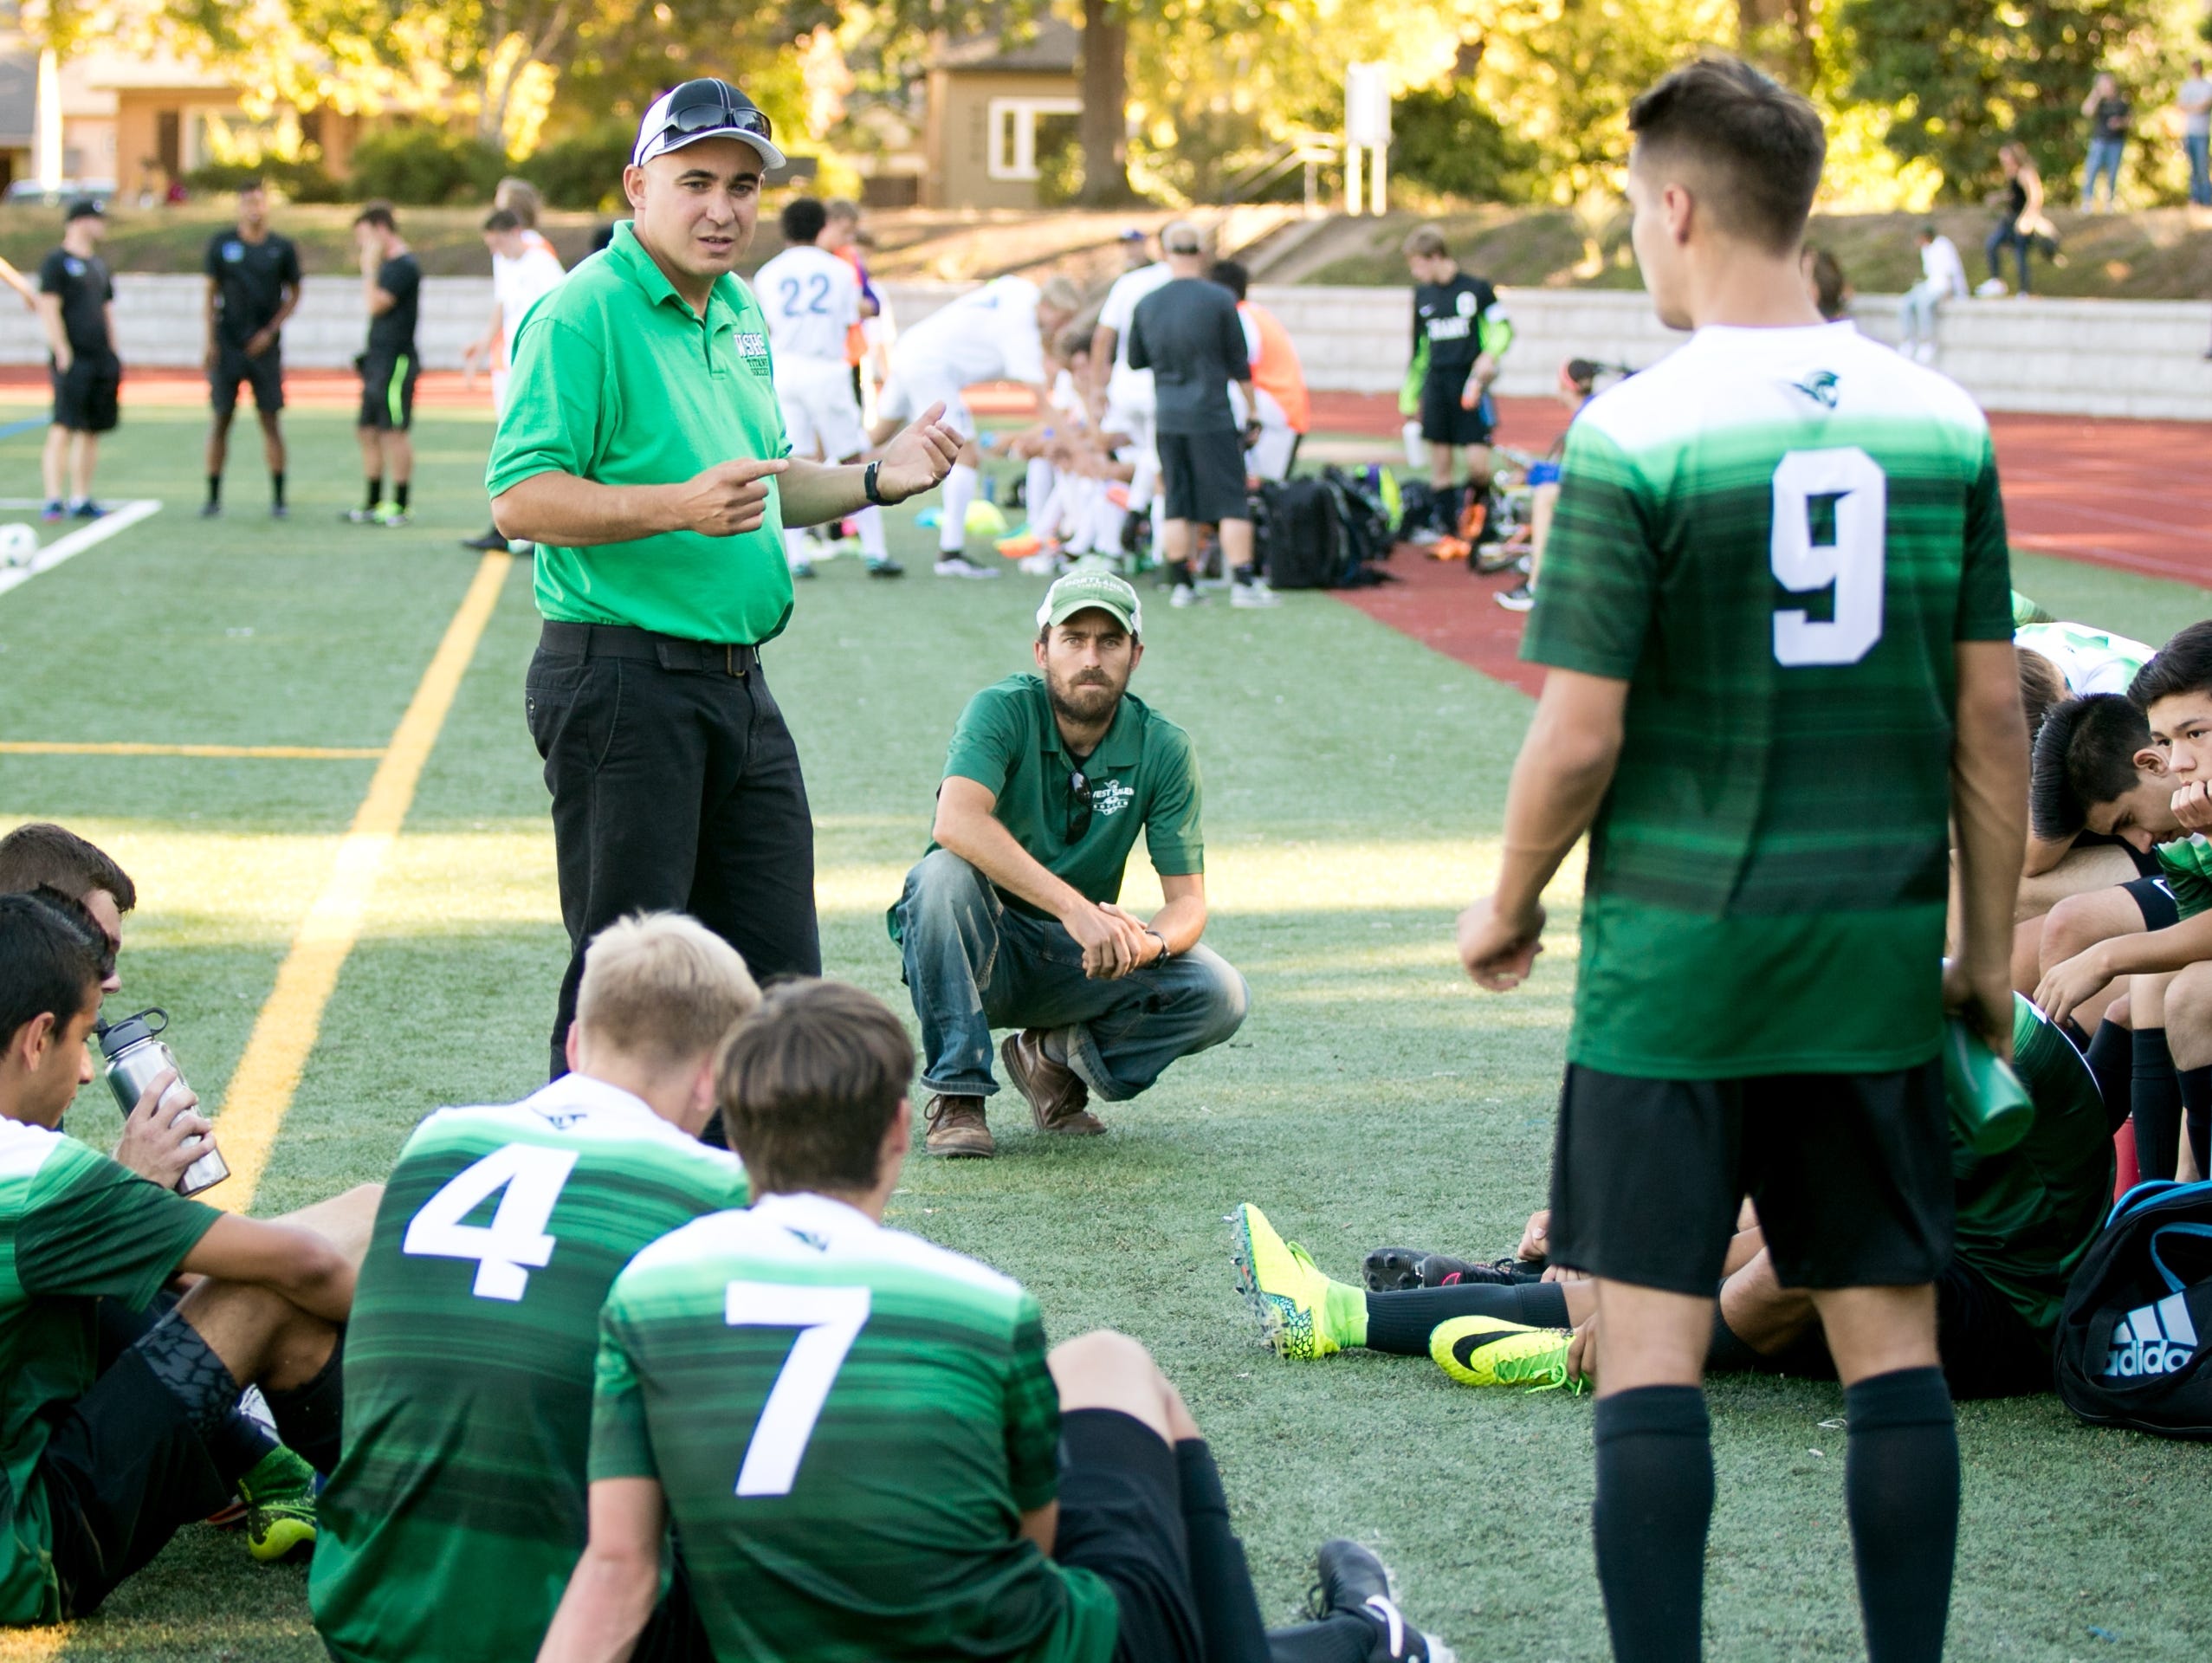 West Salem head coach Eddy Soboll talks to the team during halftime at a game against Grant High School on Tuesday, Sept. 13, 2016, in Portland, Ore. The West Salem Titans tied 1-1 with Grant.